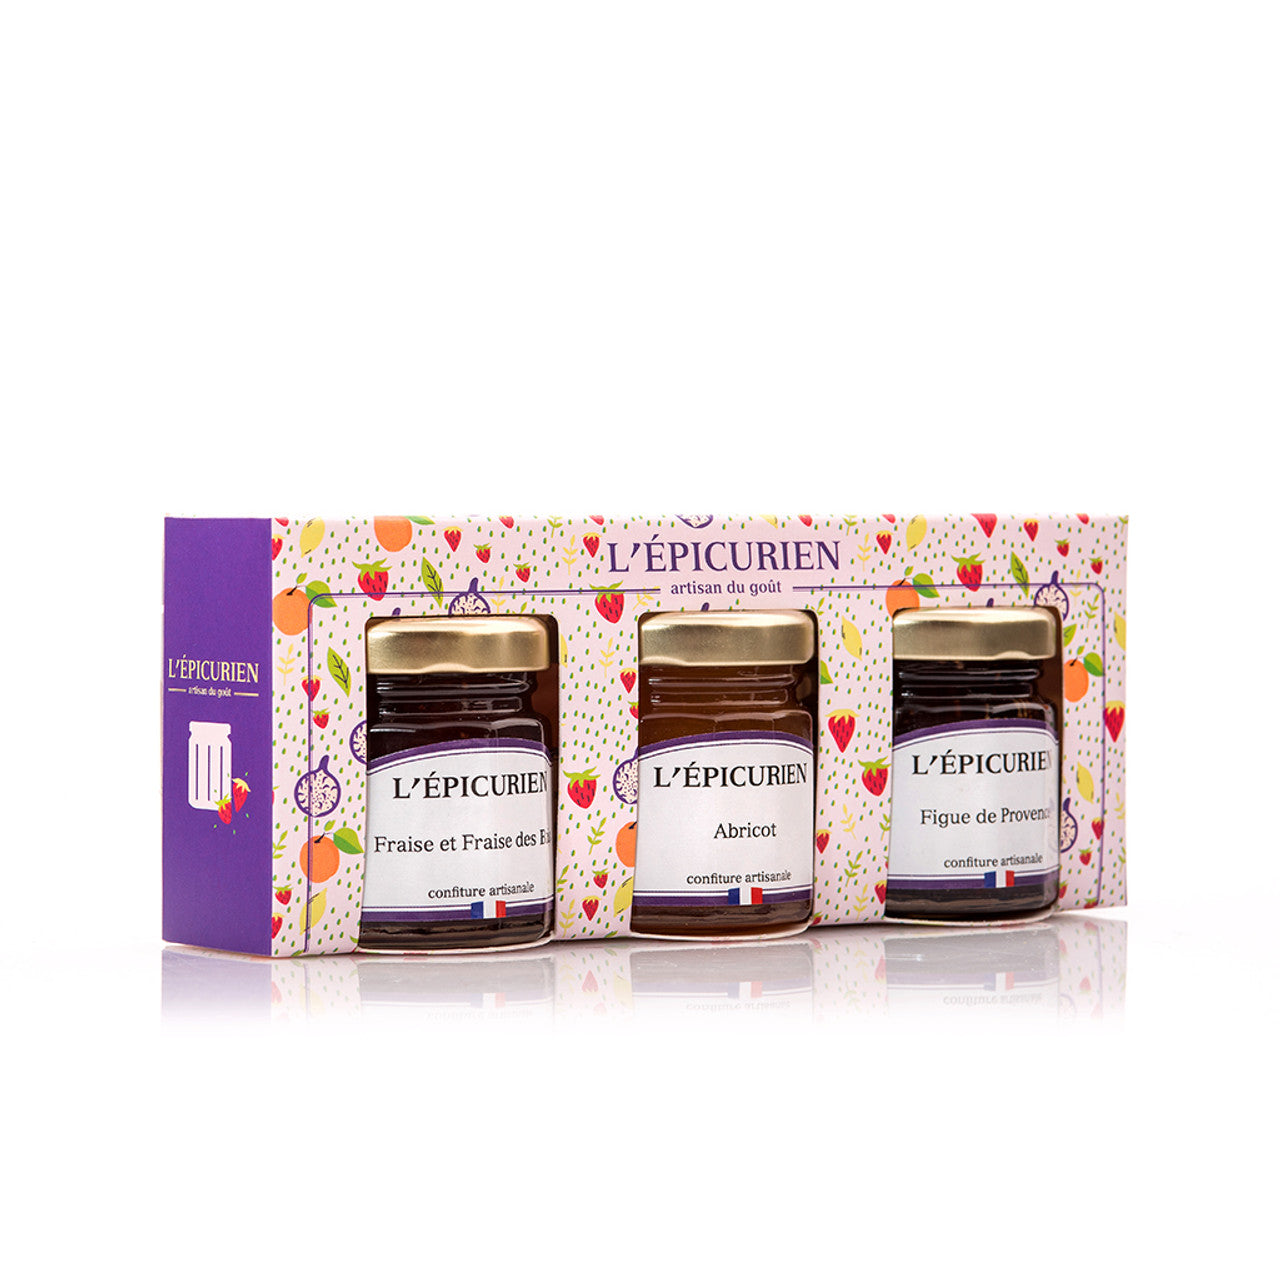 L'Epicurean jam 3 pack - strawberry, apricot and fig written in French